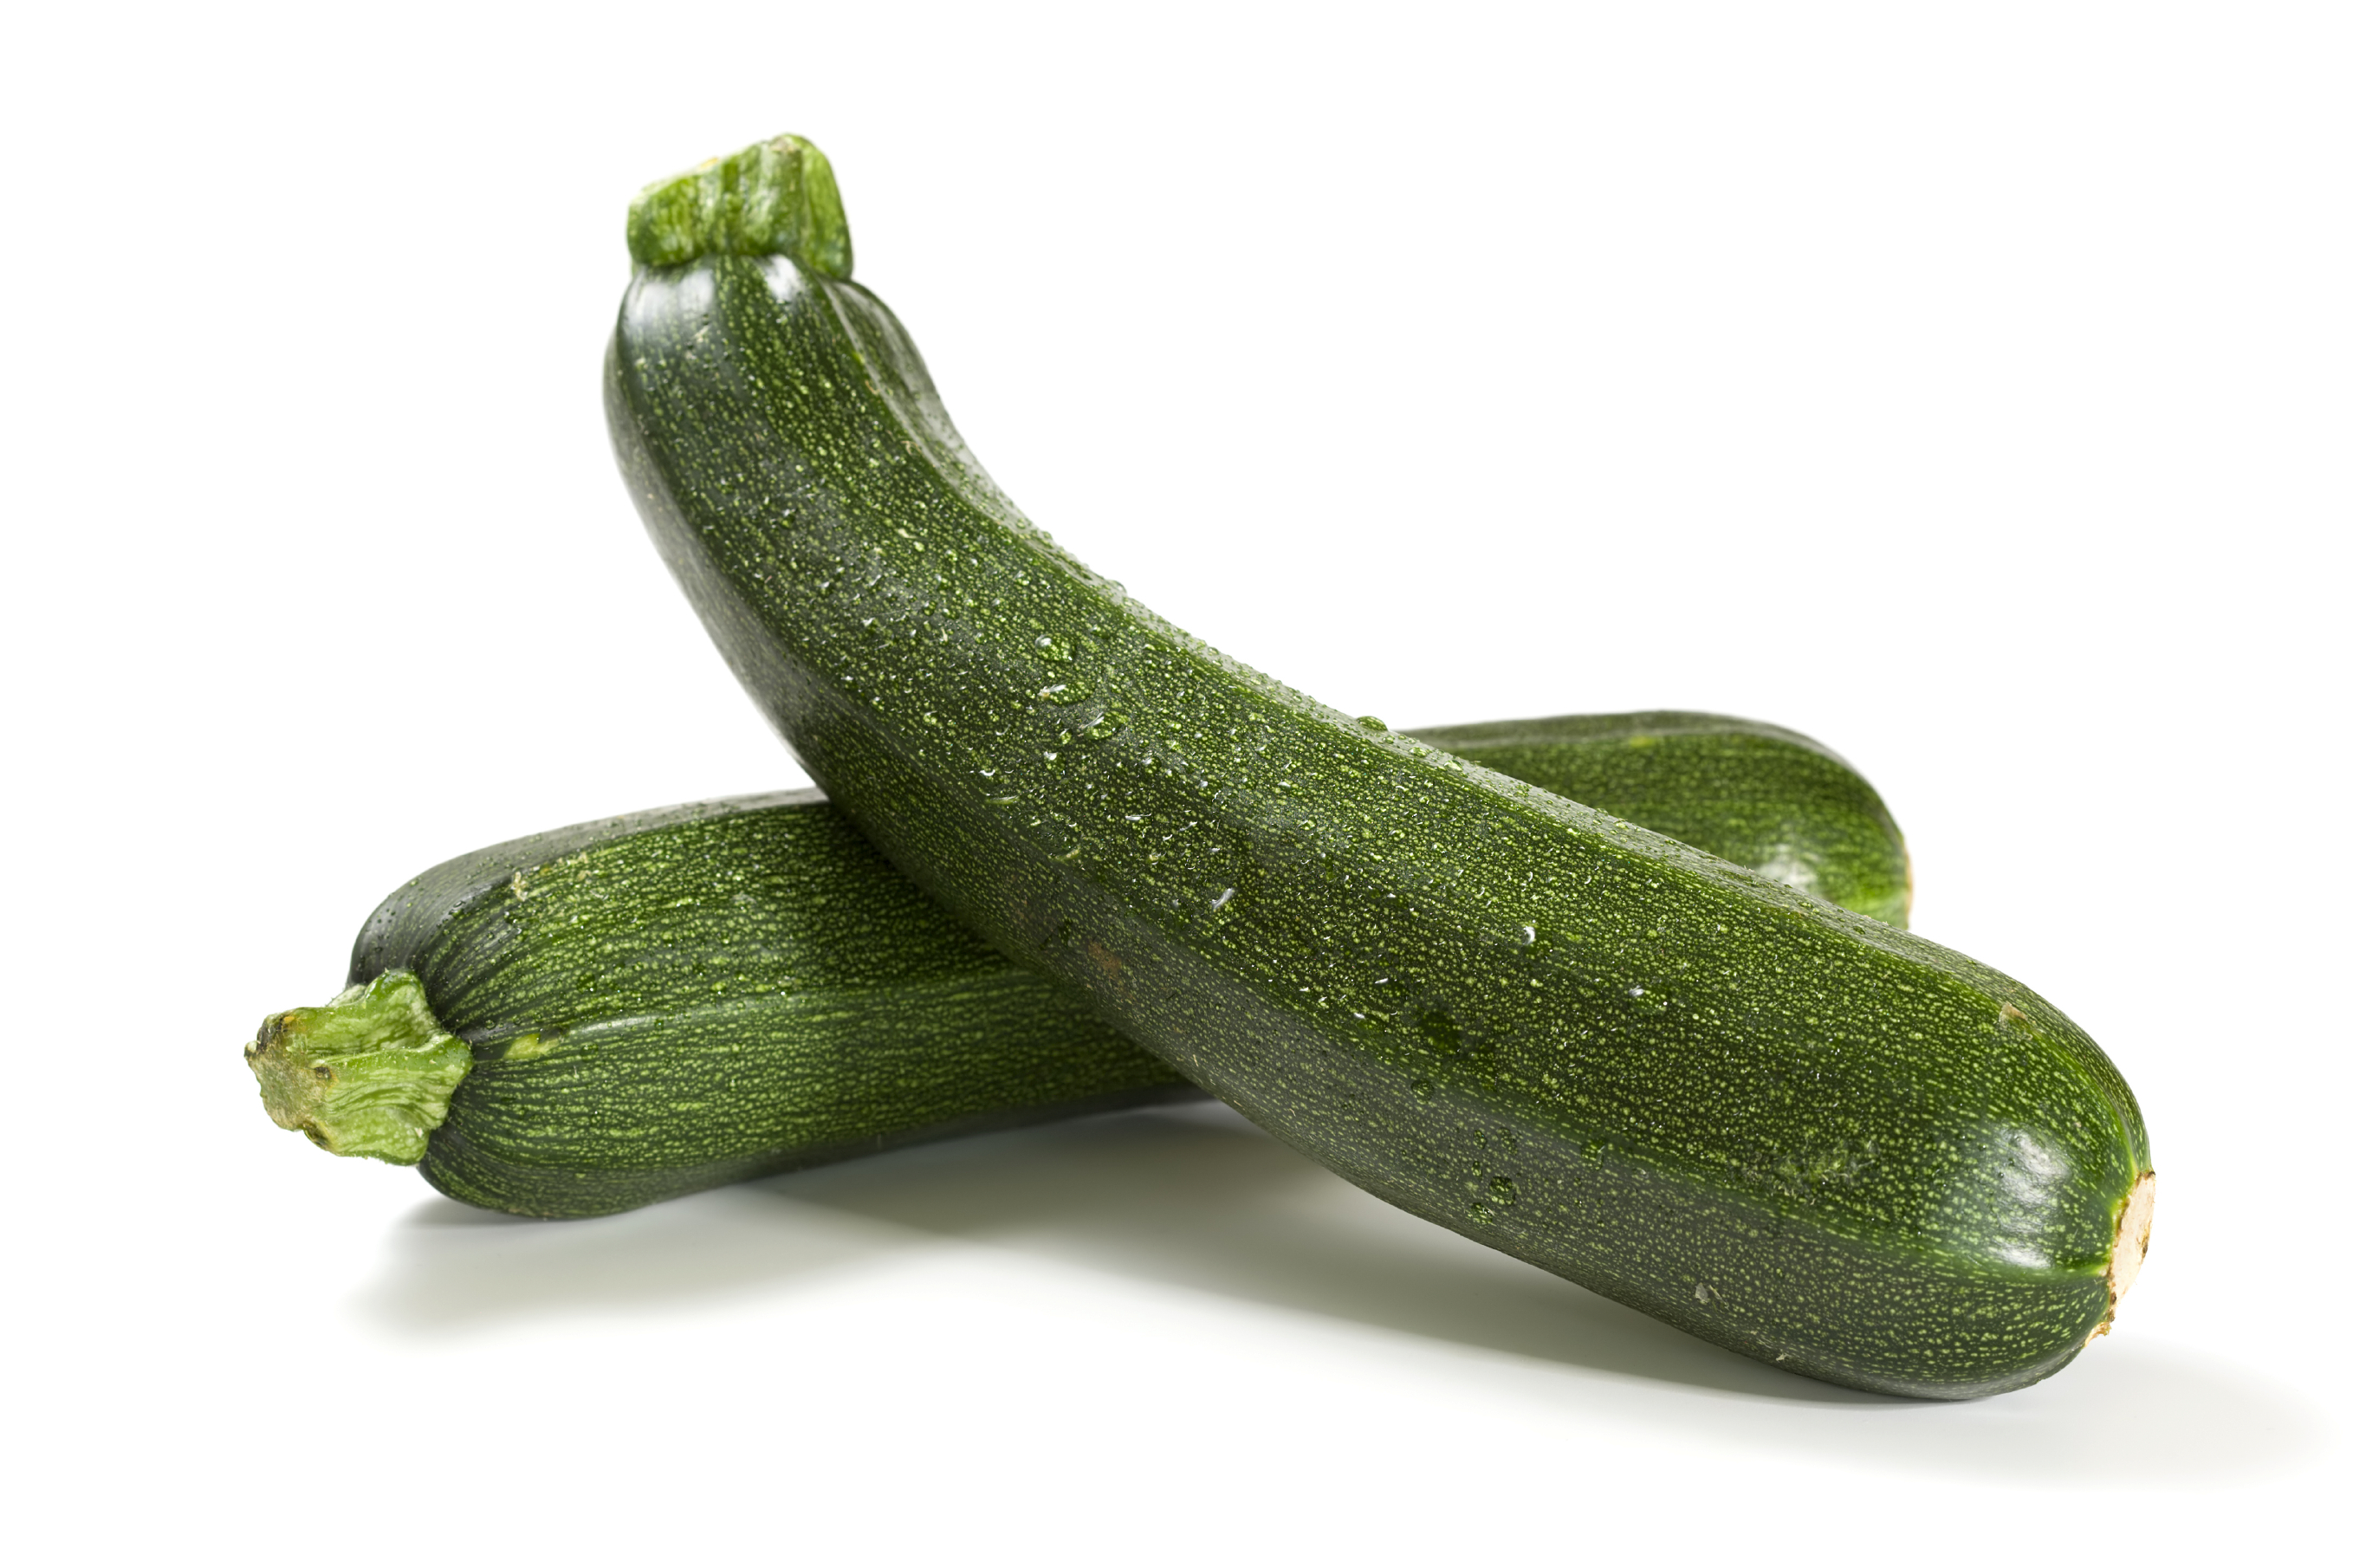 Green Squash... Zucchini, What's the Difference? - Stauffers